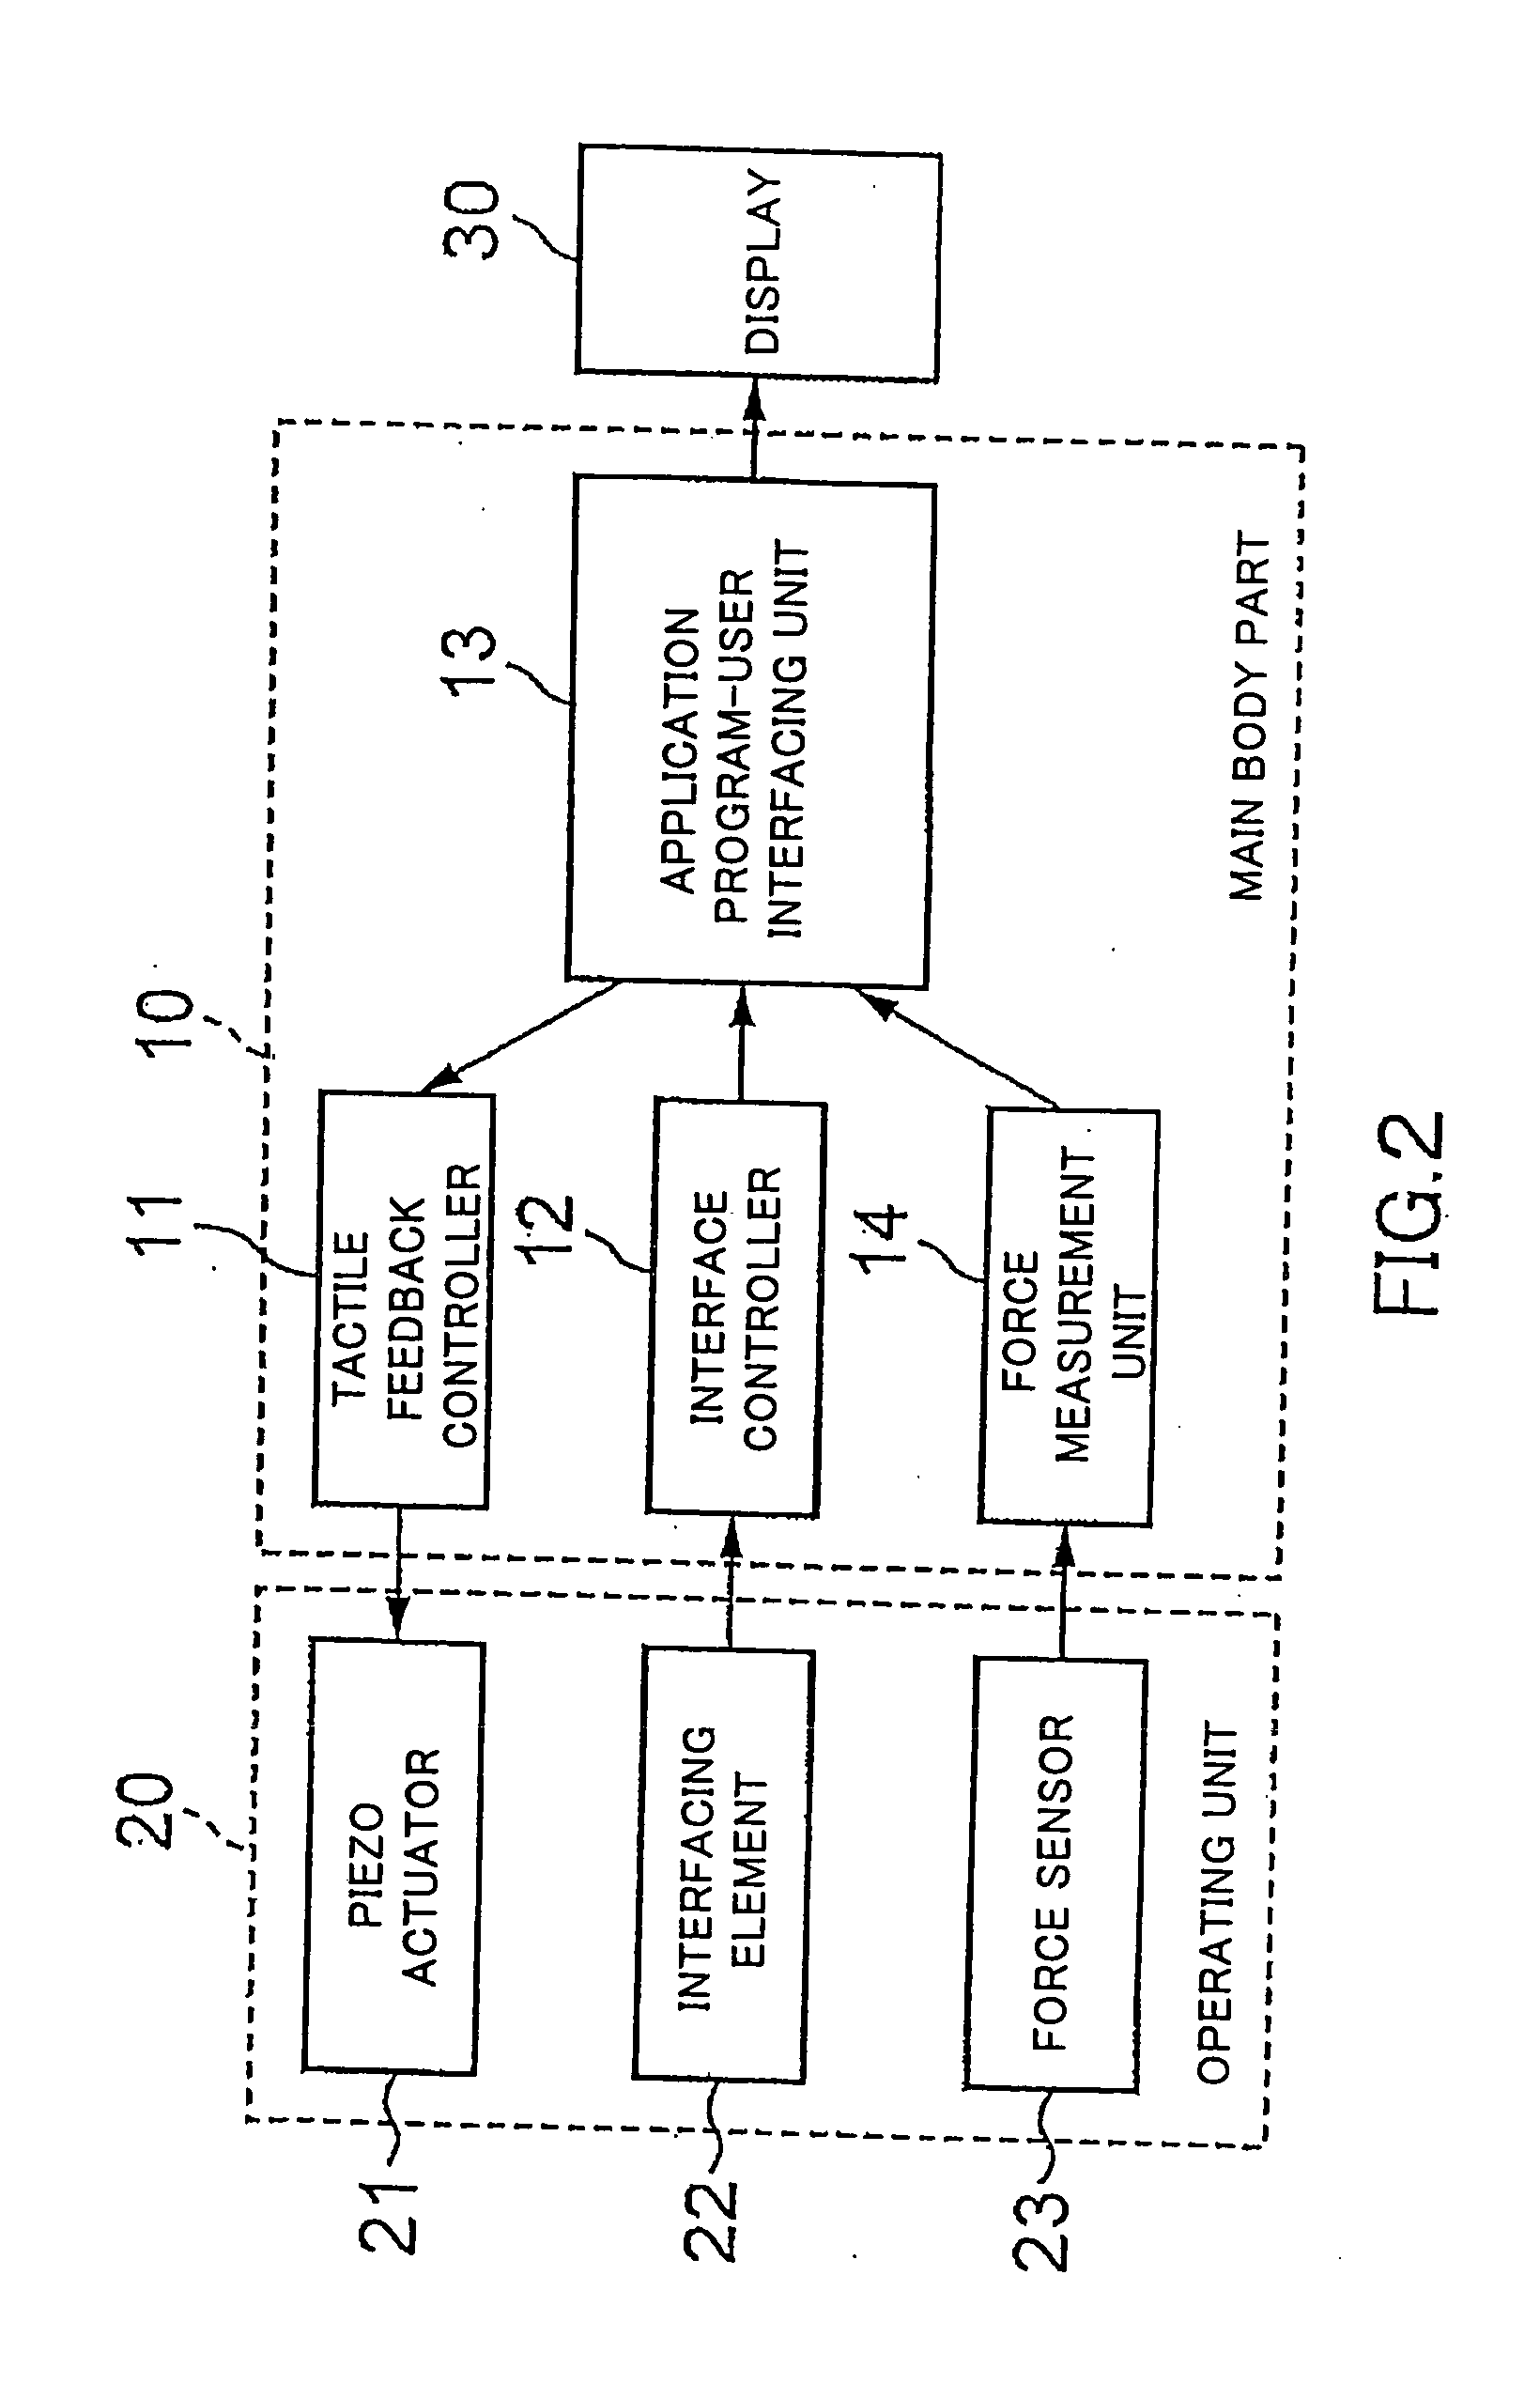 Tactile and force feedback device